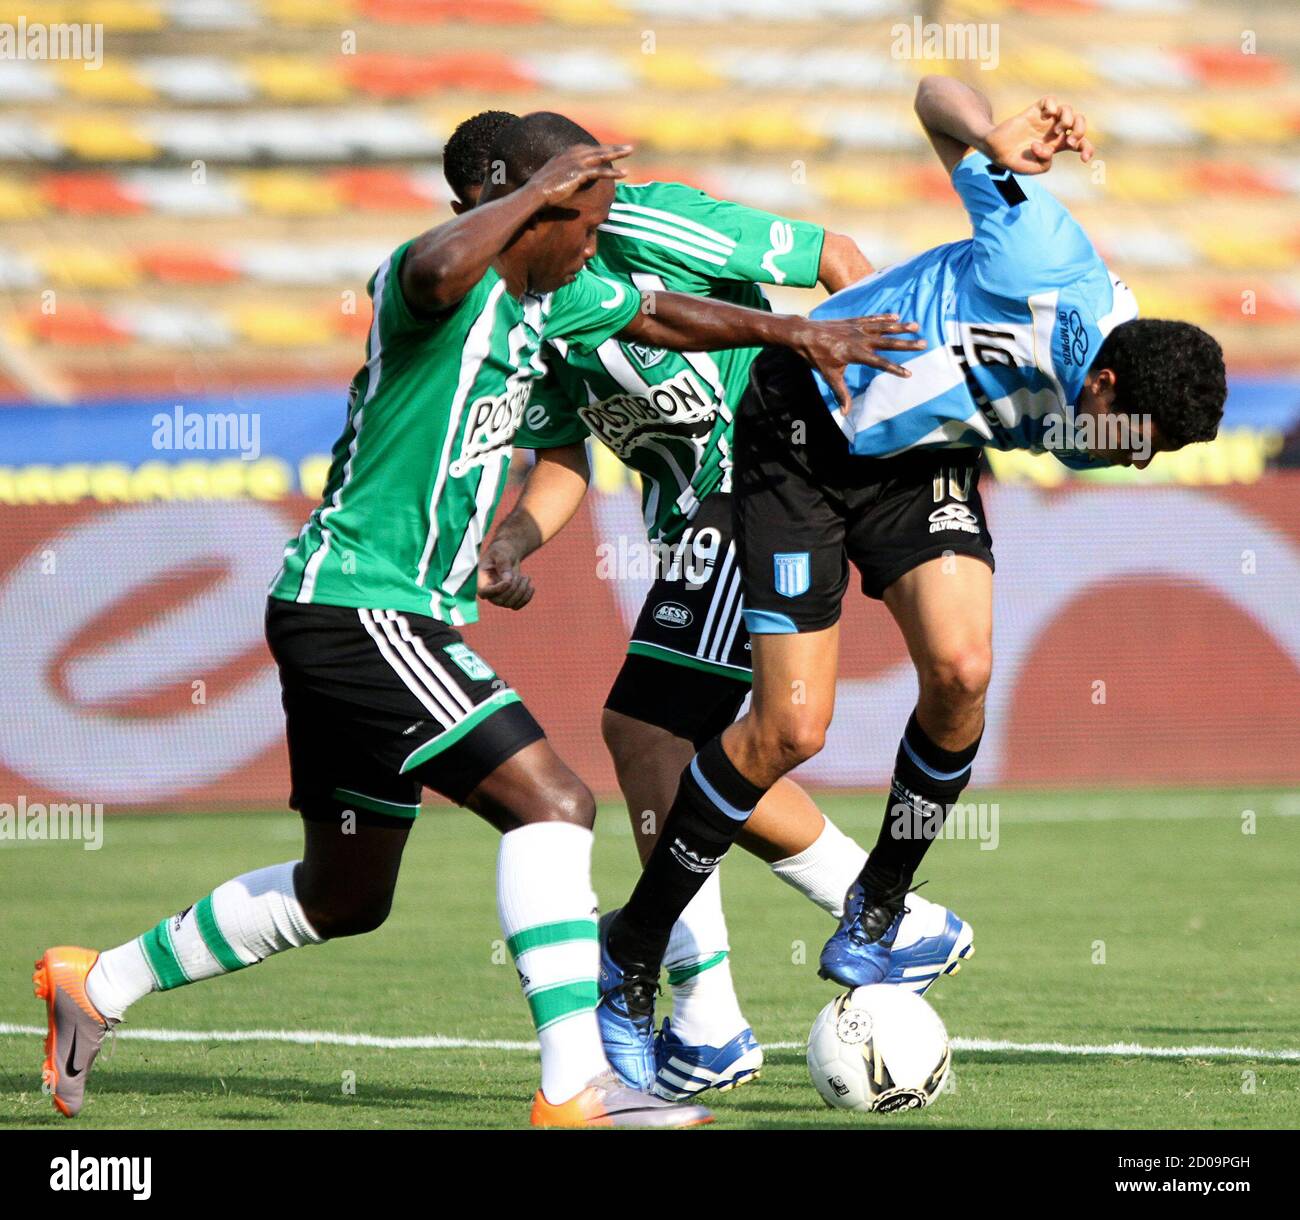 Giovanni Moreno (R) of Argentina's Racing Club fights for the ball with  Carlos Renteria of Colombia's Atletico Nacional during their friendly  football match at Atanasio Girardot stadium in Medellin January 30, 2011.